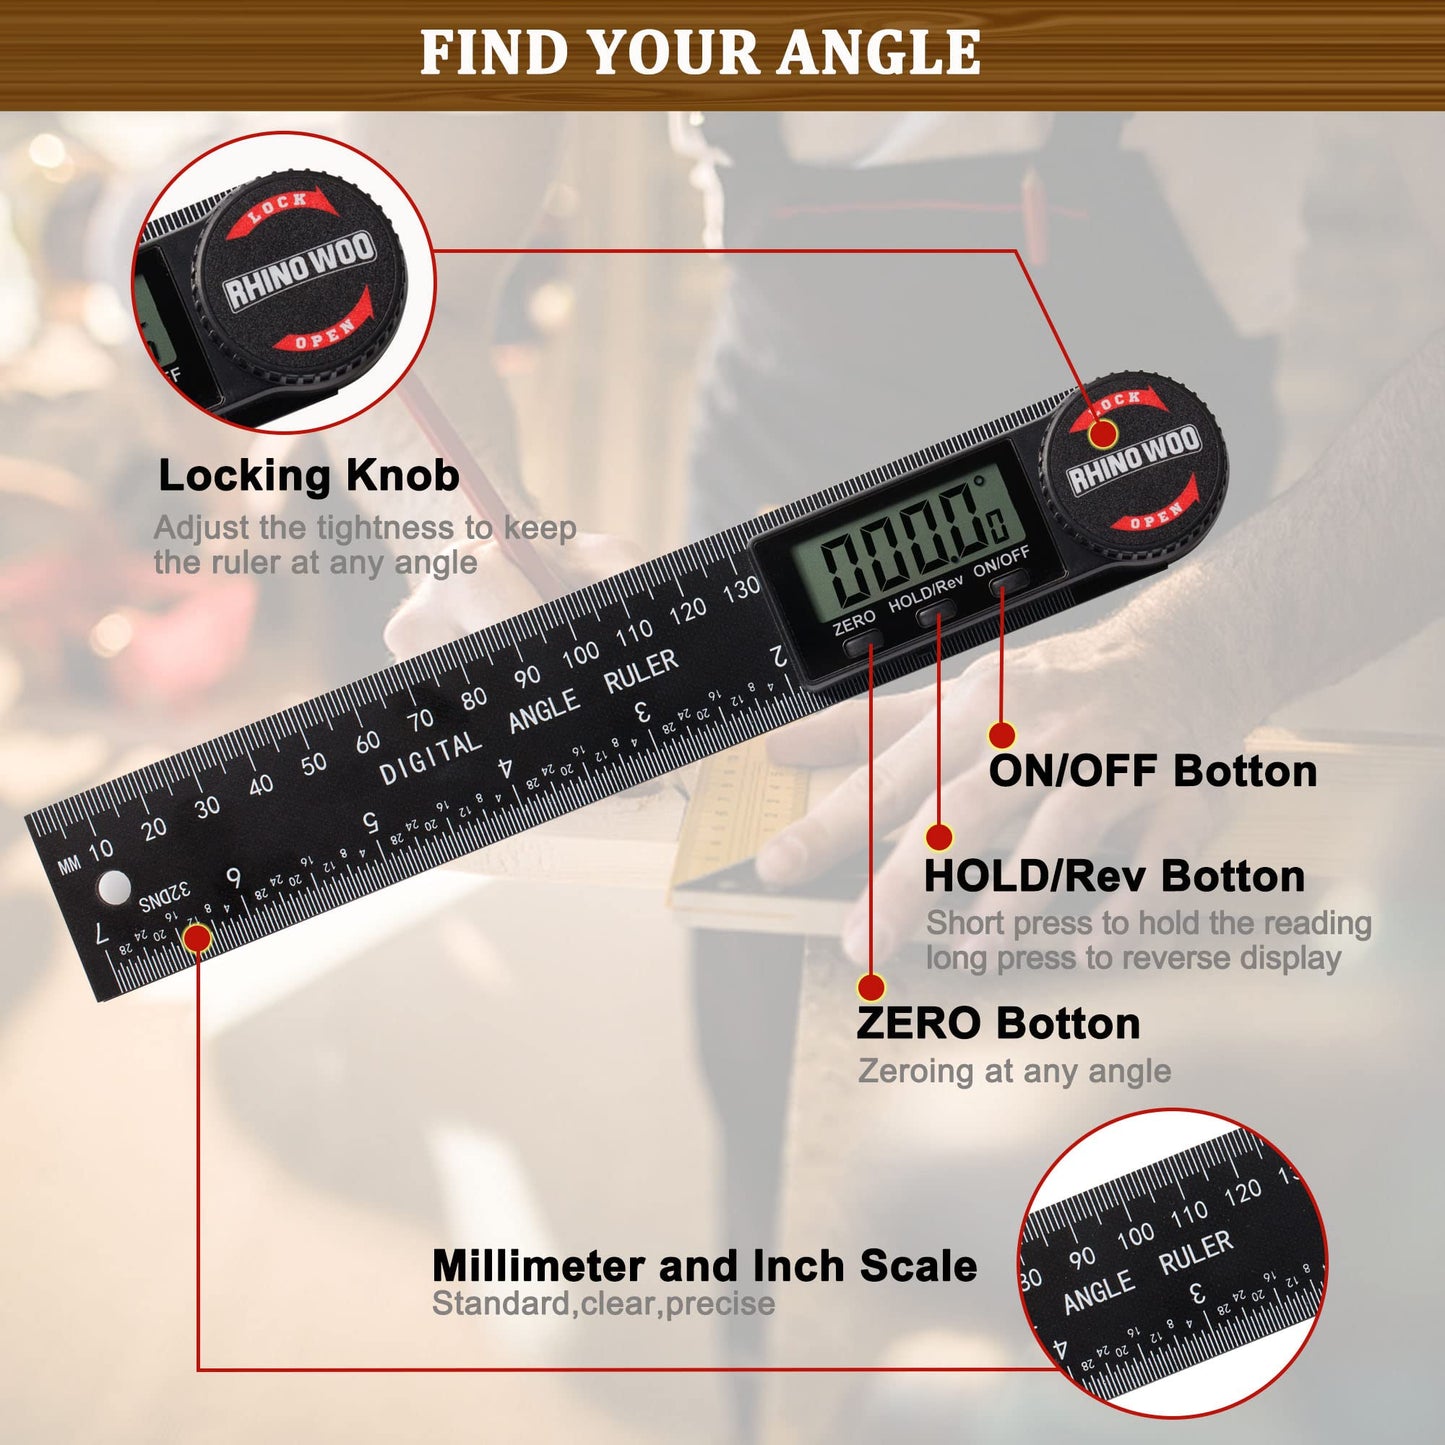 Digital Angle Finder Protractor, Angle Finder Ruler with 7inch/200mm, Angle Measuring Tool for Woodworking/Carpenter/Construction/DIY Measurement(2